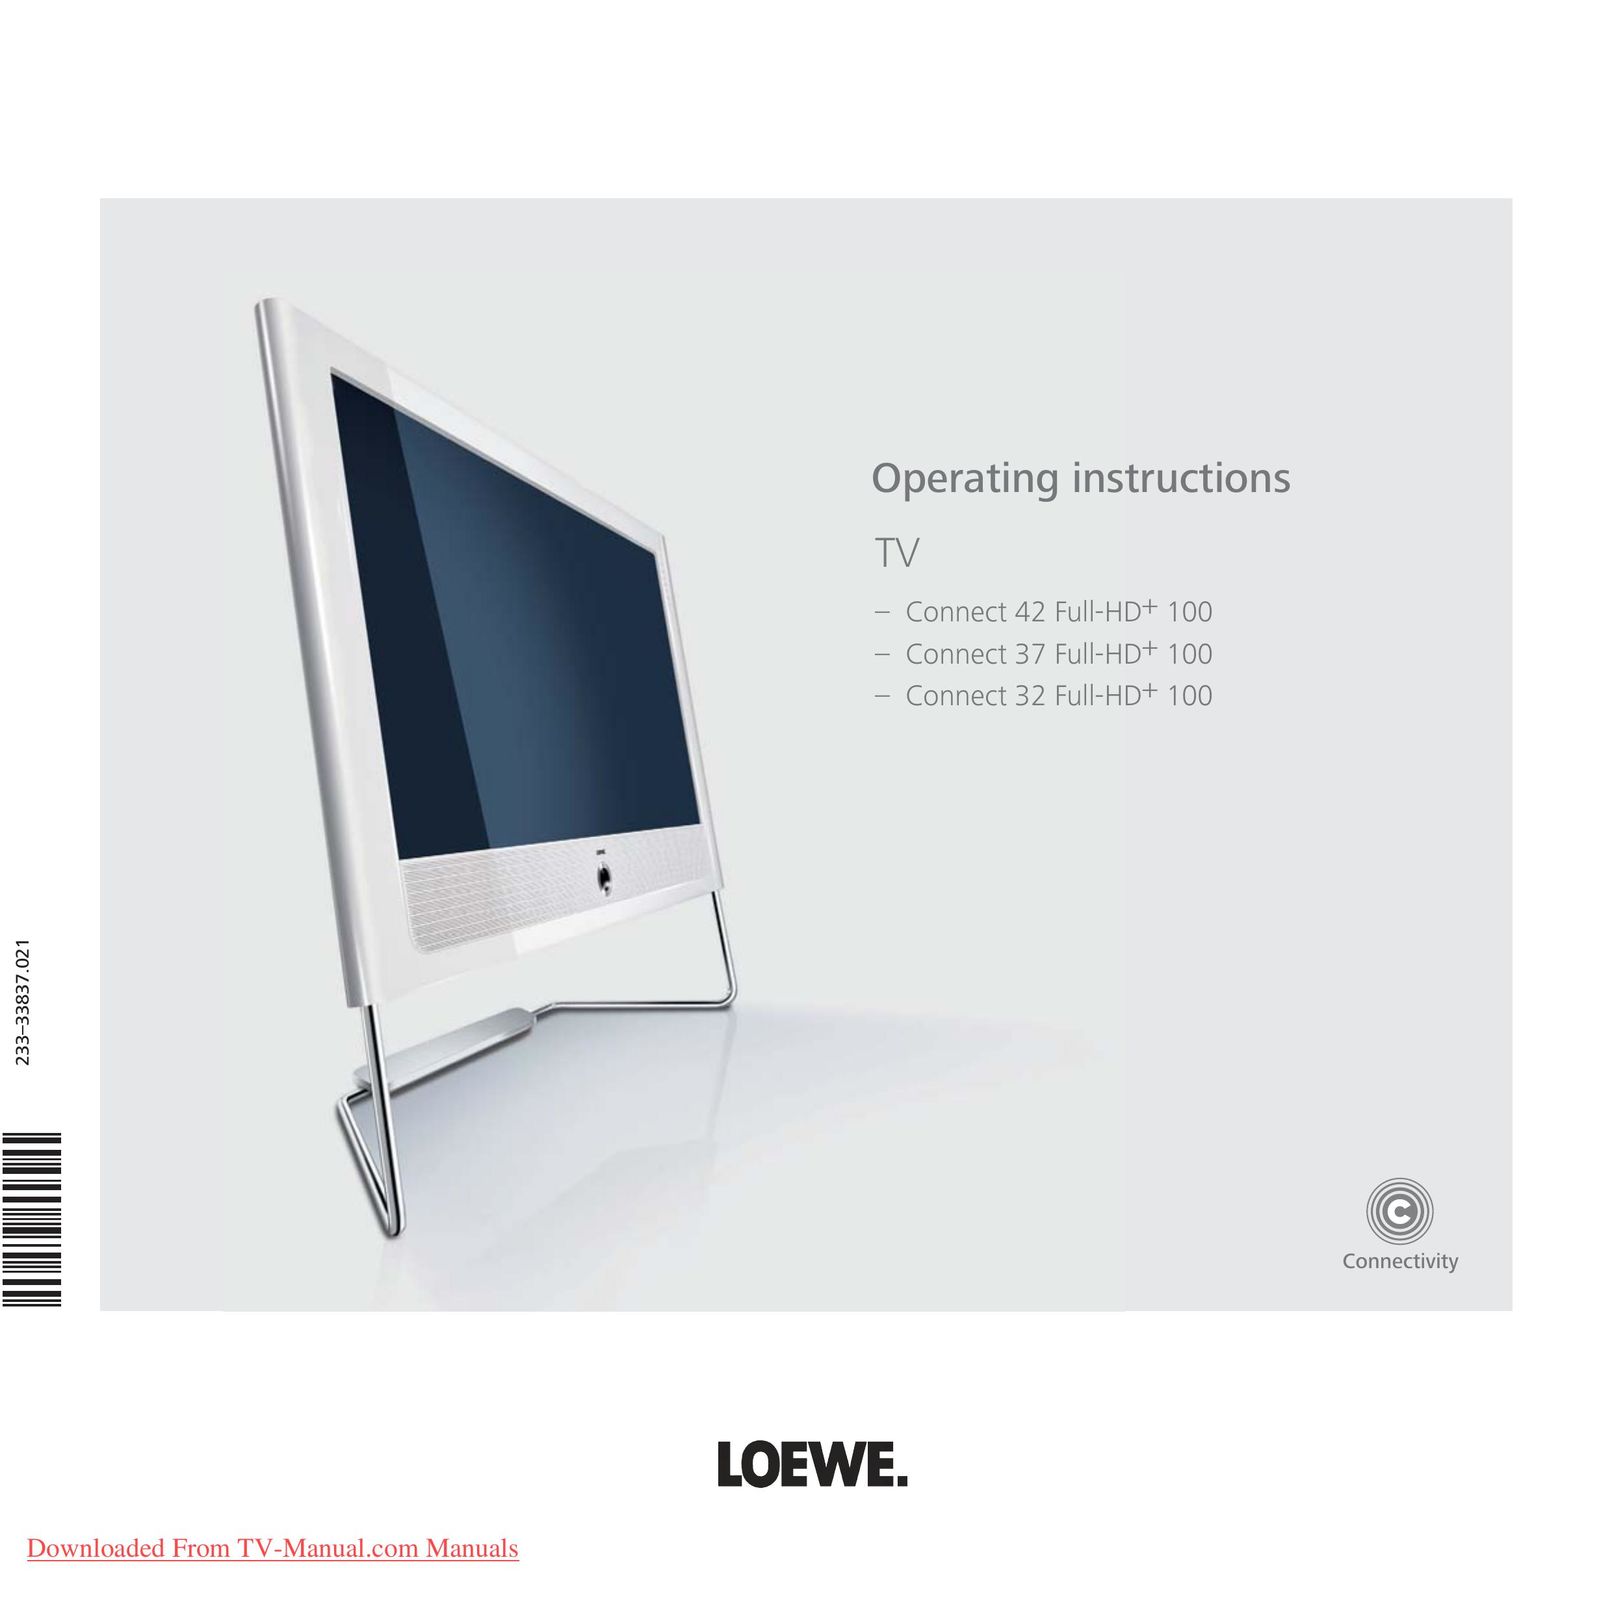 Loewe Connect 32 Full-HD+ 100 CRT Television User Manual